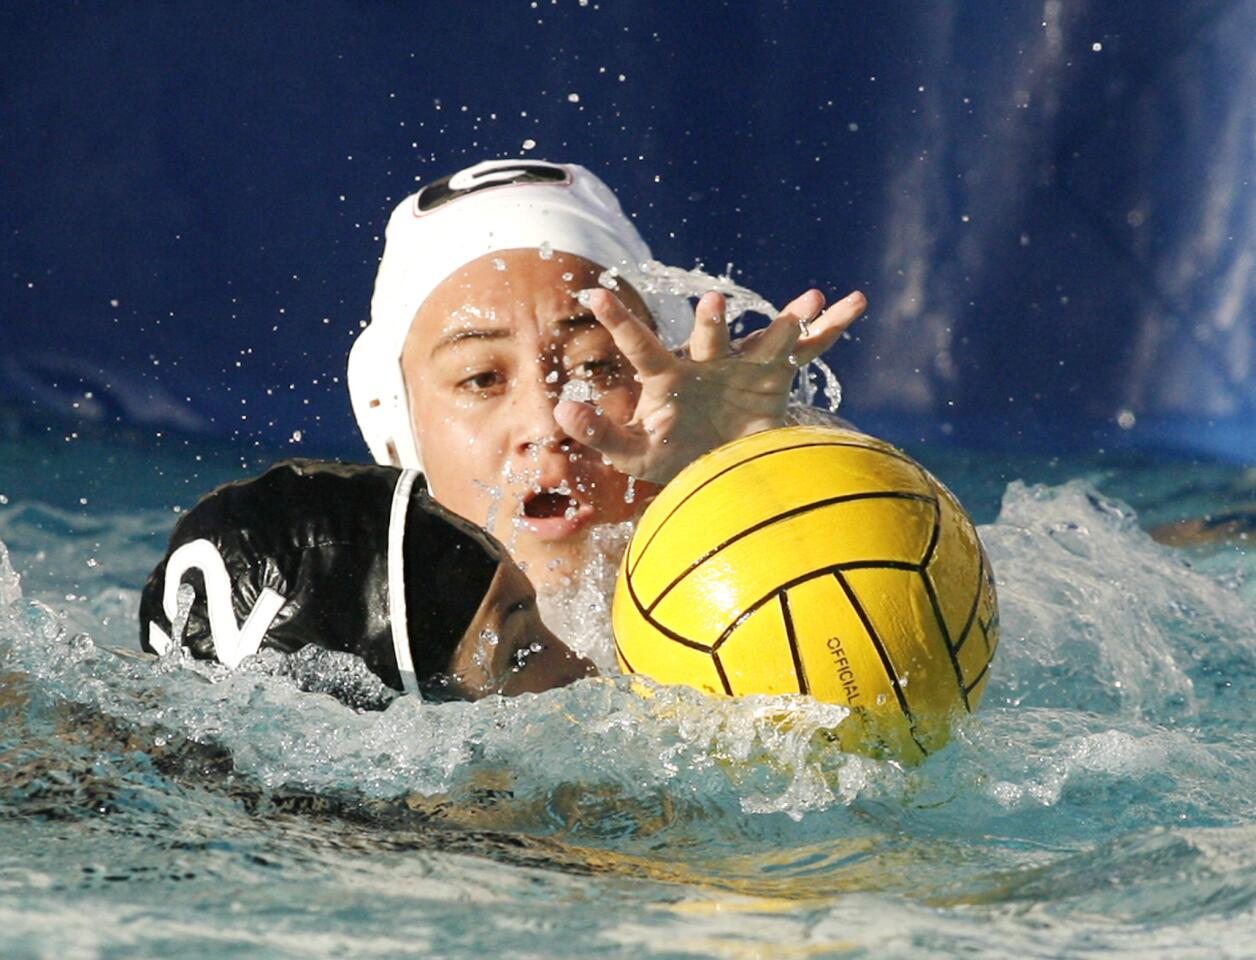 Glendale's Maddie Corpuz reaches to the ball in front of the Hoover goal against Hoover's Maggie Amirian in the second quarter in a Pacific League girls water polo match at Hoover High School in Glendale on Thursday, January 10, 2013.